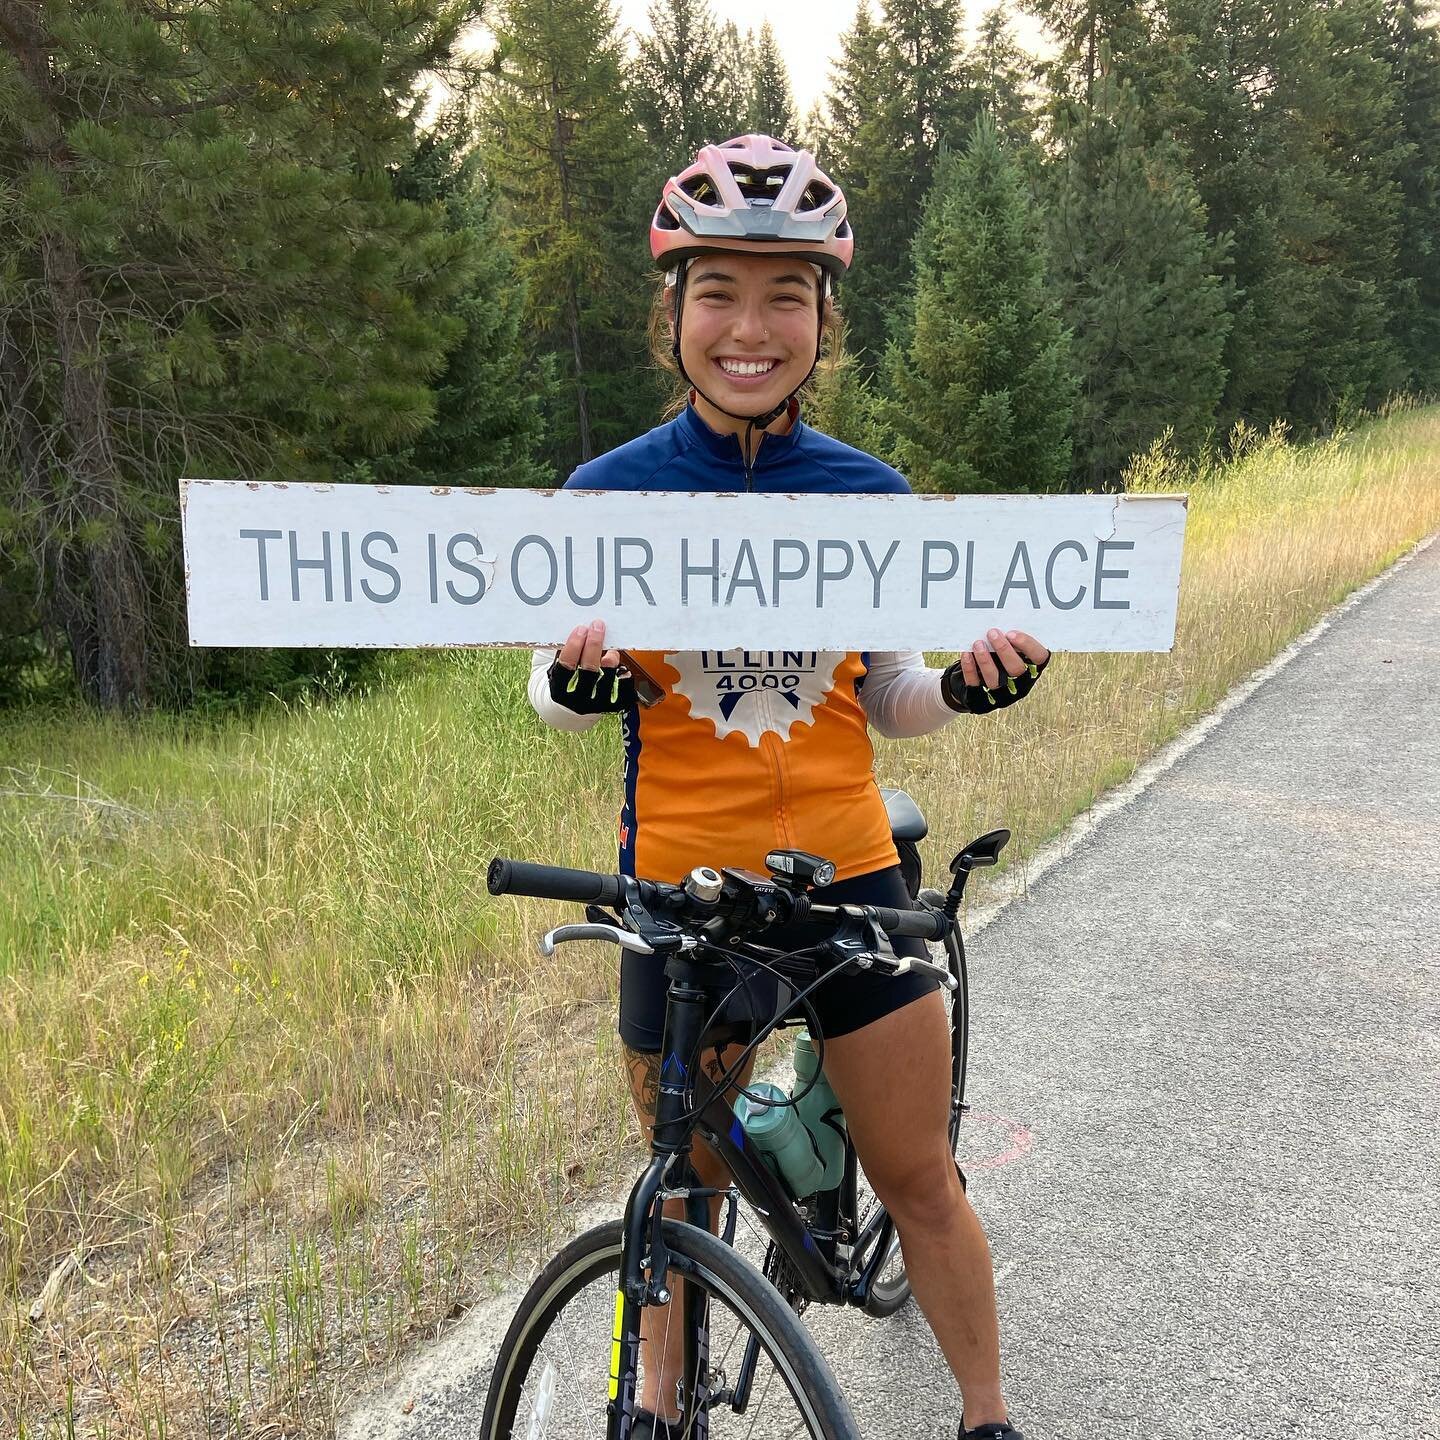 Day 56: Although we were bummed that we had to shuttle mid ride from Missoula to Superior, MT due to the smoke in the air. We made the most of our day by enjoying the little things like finding these signs and license plates along the road! 
**Follow